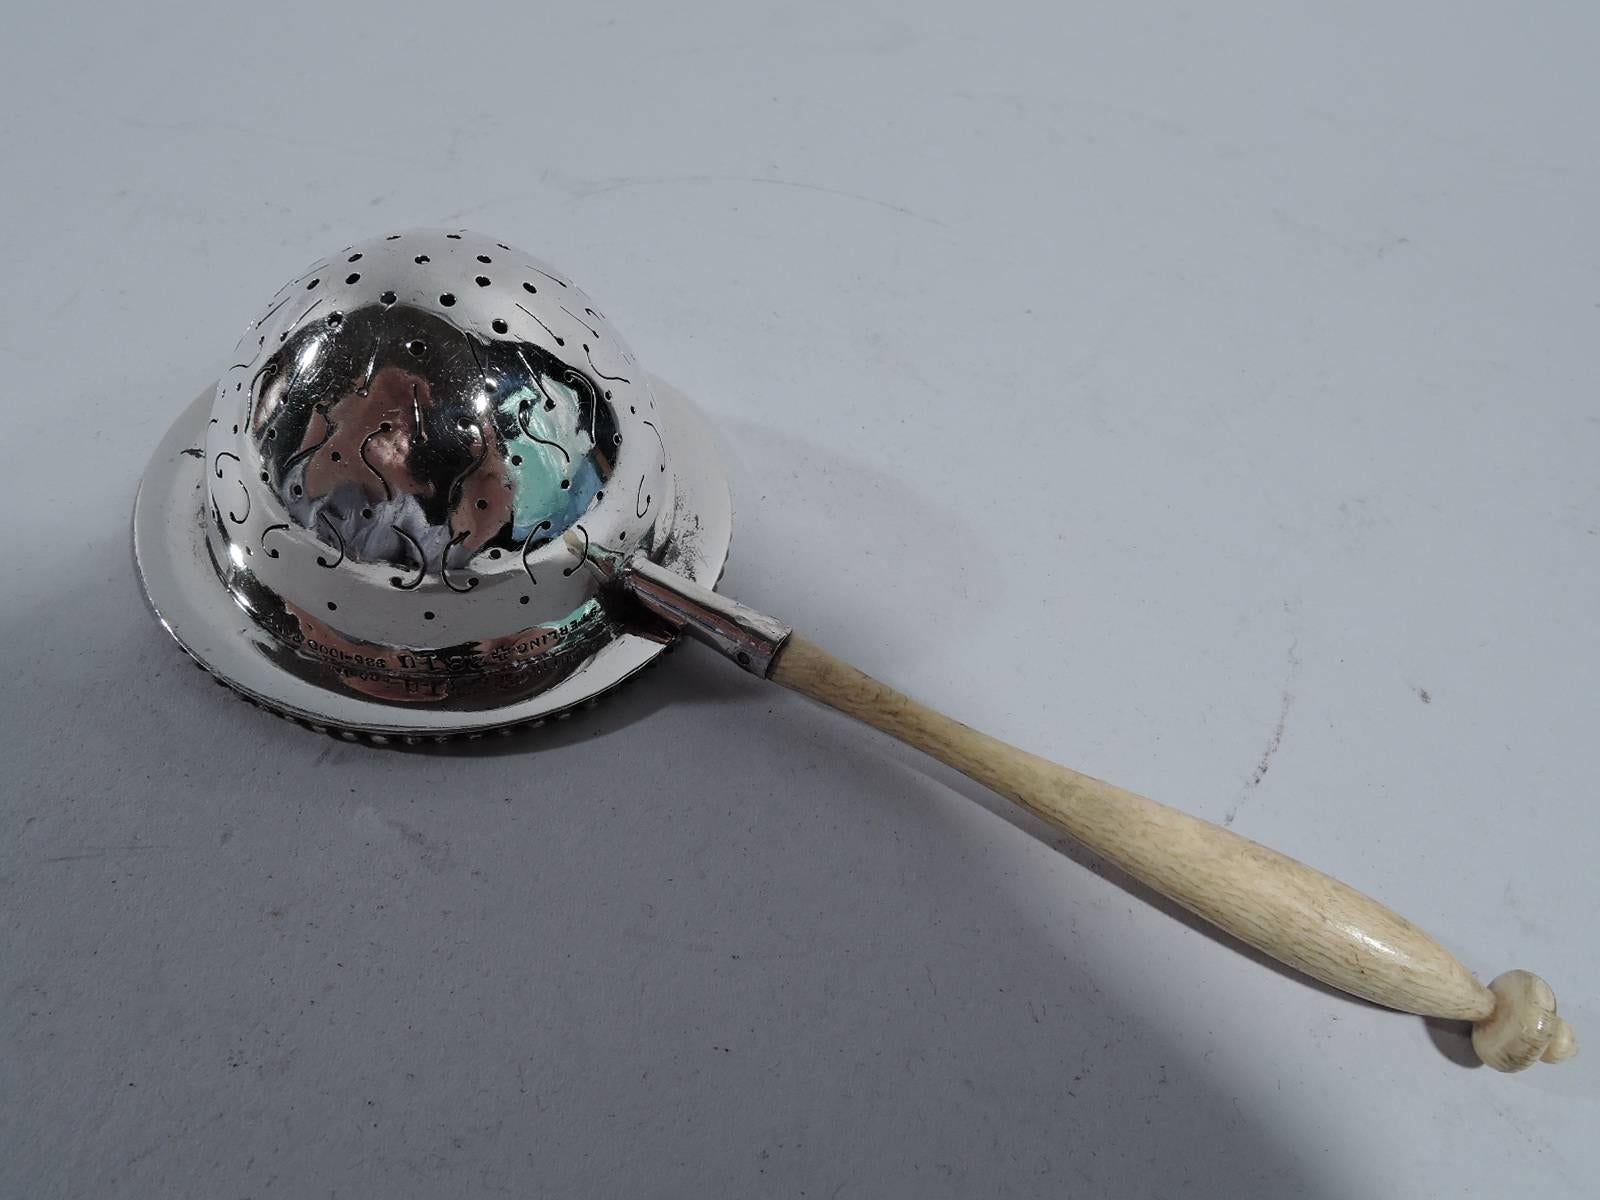 American Edwardian sterling silver tea strainer. Deep, round, and pierced bowl with wispy engraved scrolls and lines. Rim has applied beading. Baluster wood handle. Hallmarked Fradley, a New York maker. Hallmark includes no. 281U. Gross weight: 1